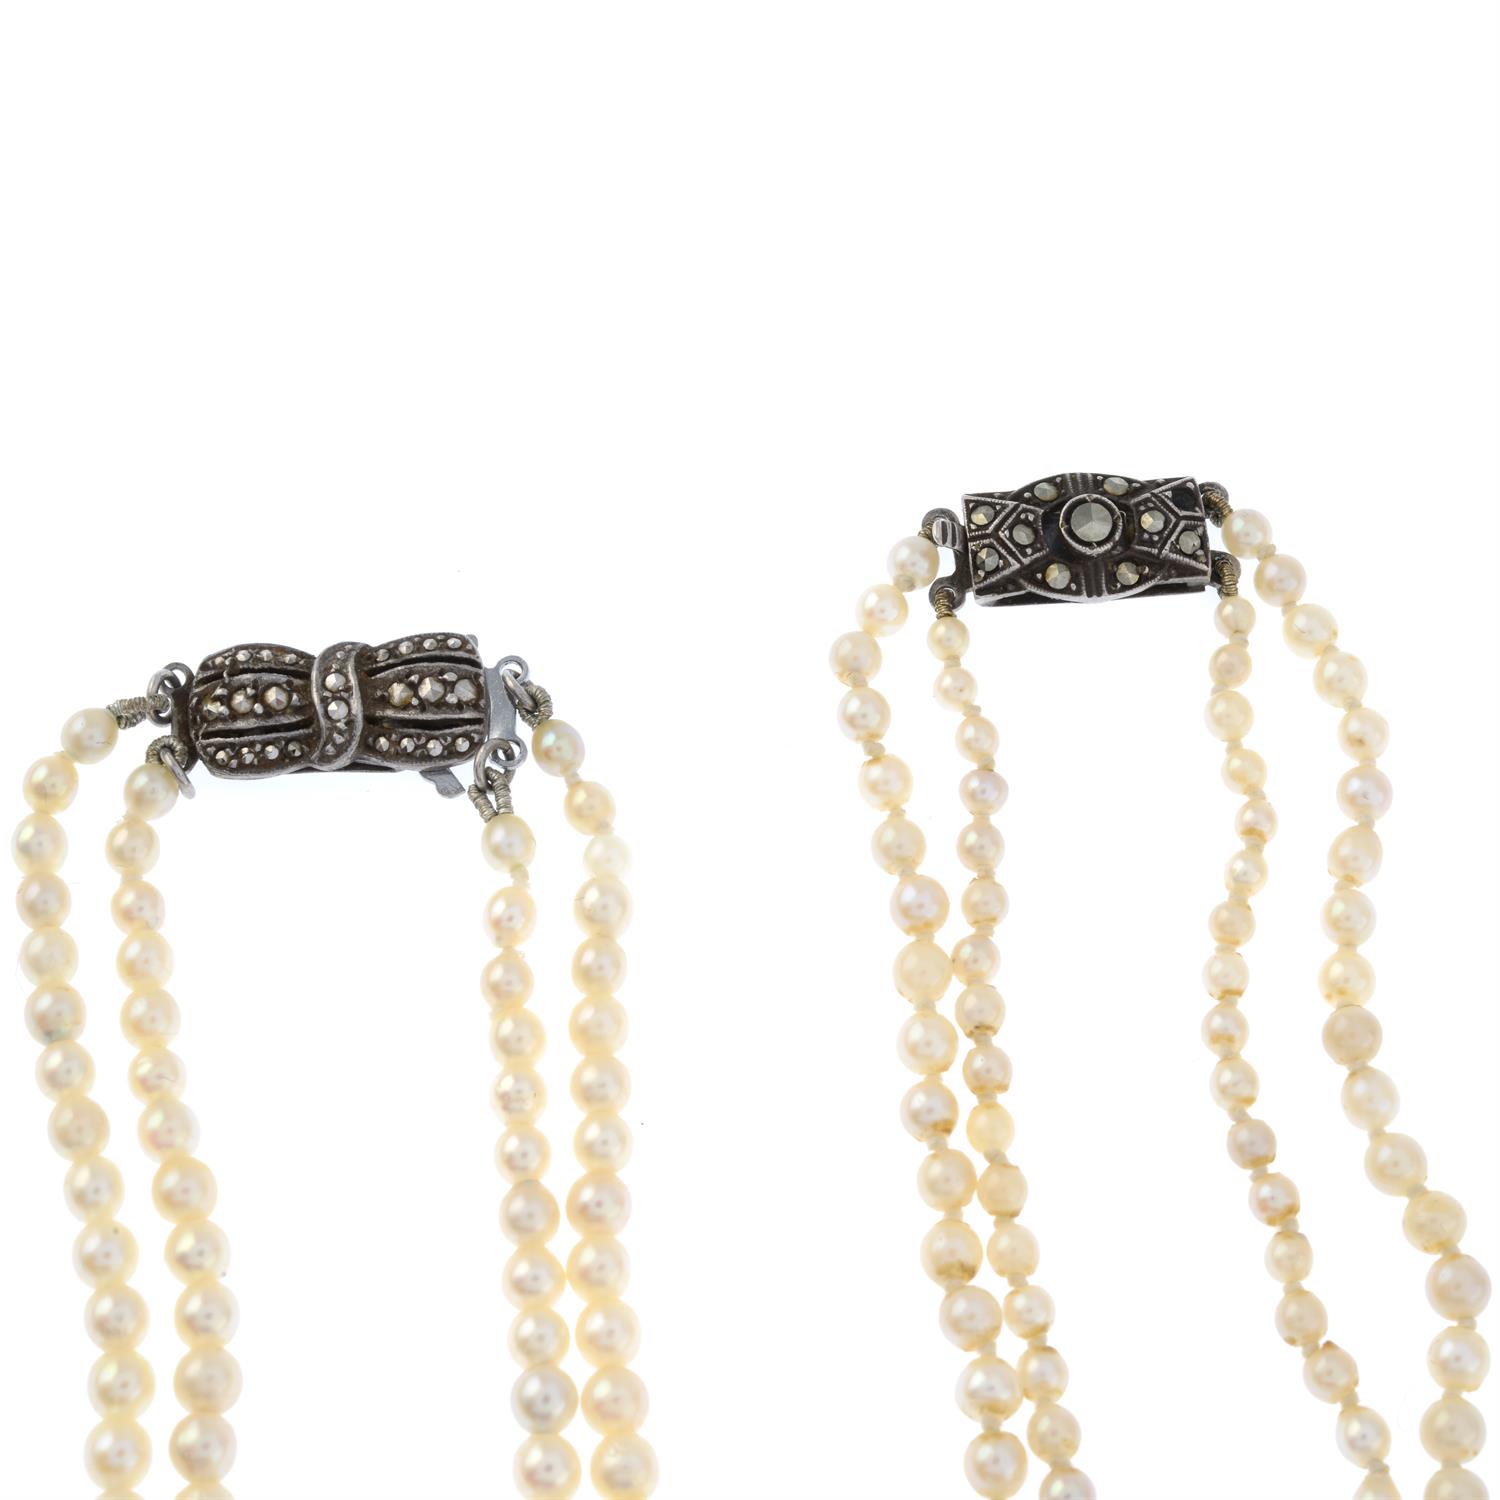 Two cultured pearls necklaces - Image 2 of 2